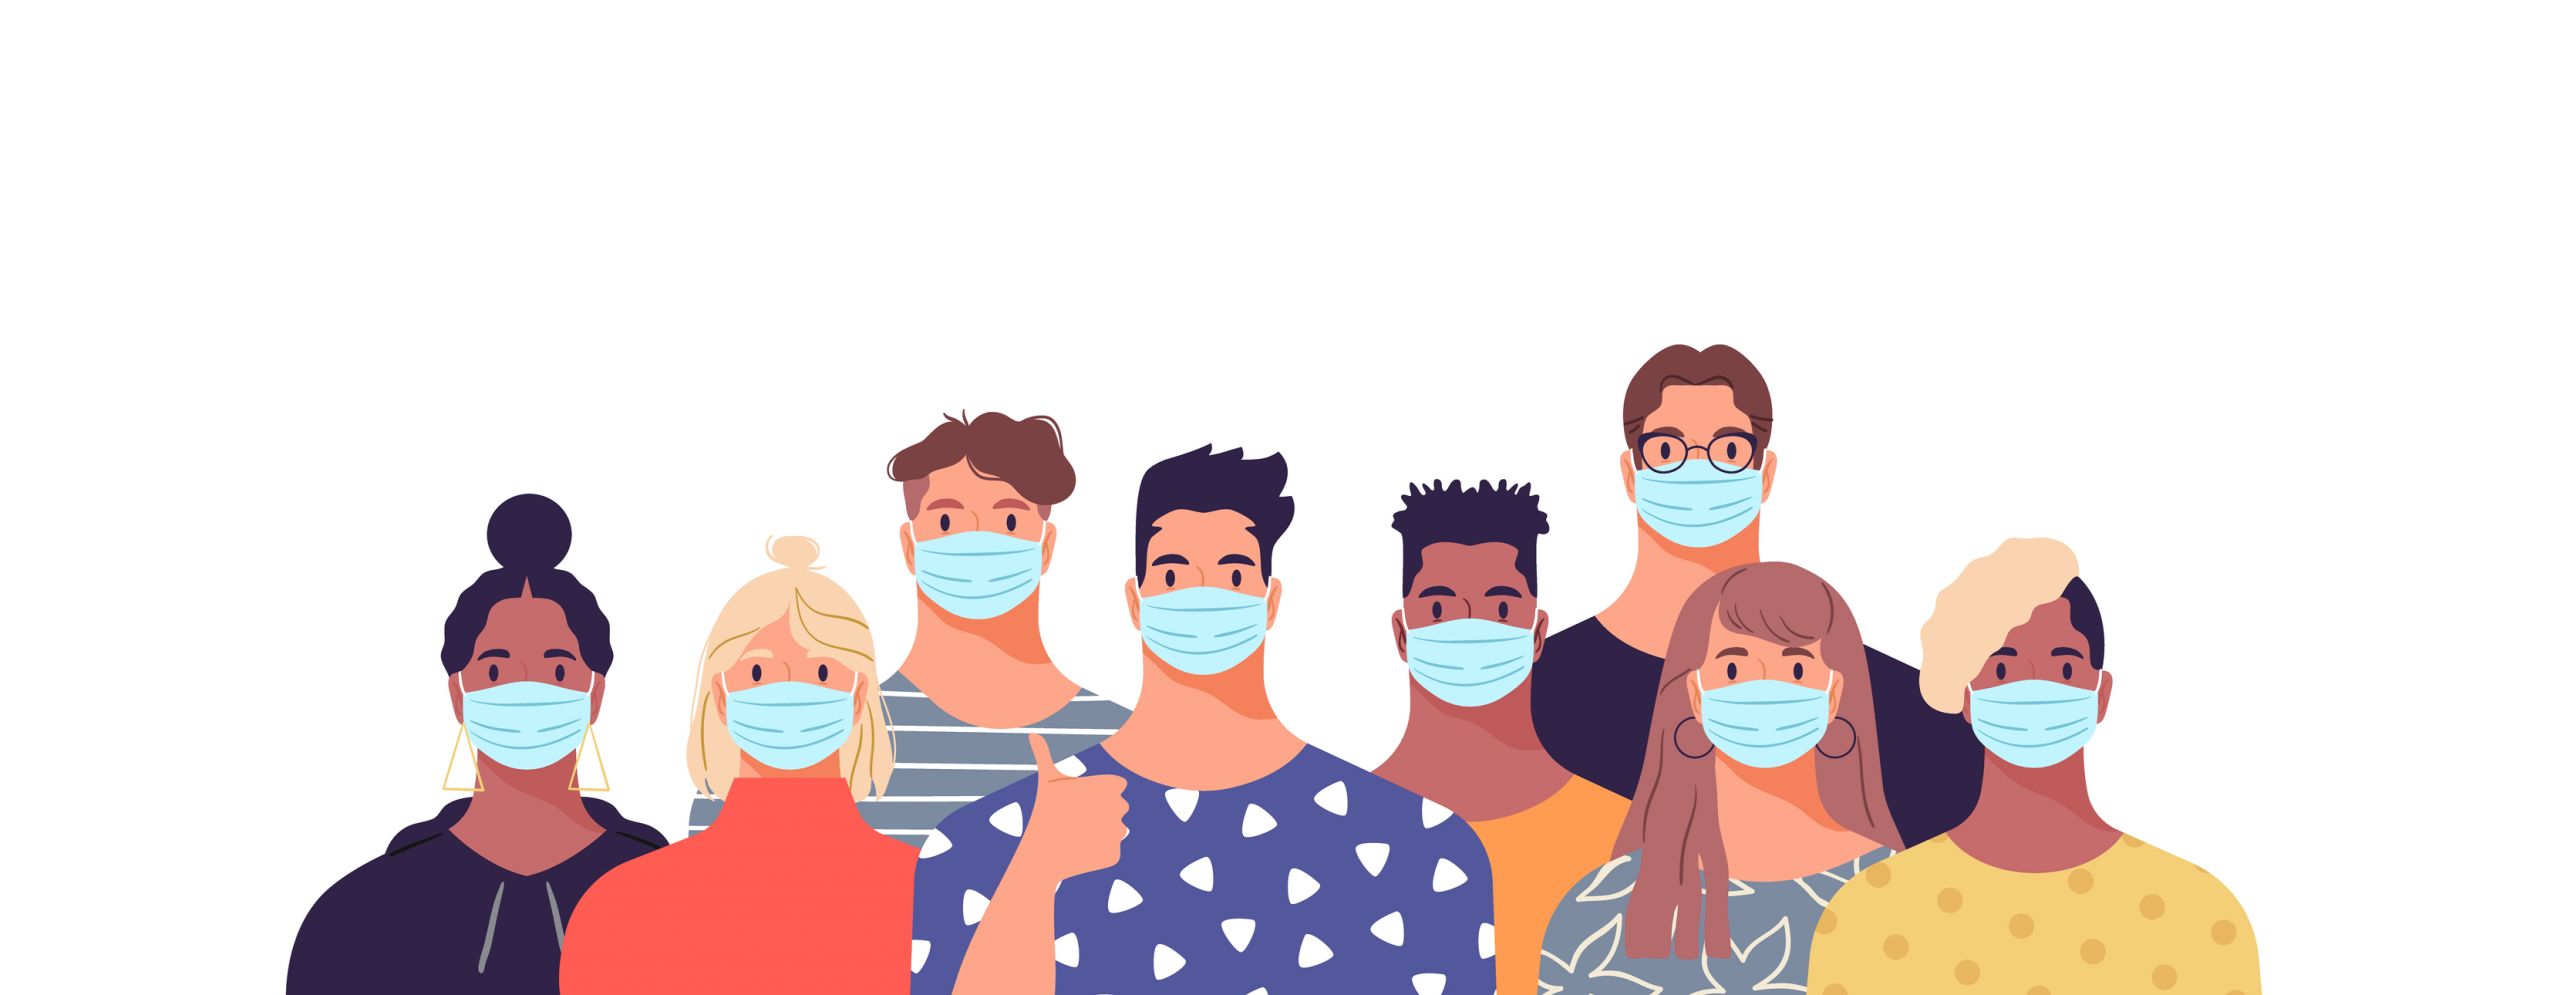 Illustration of young people with face masks